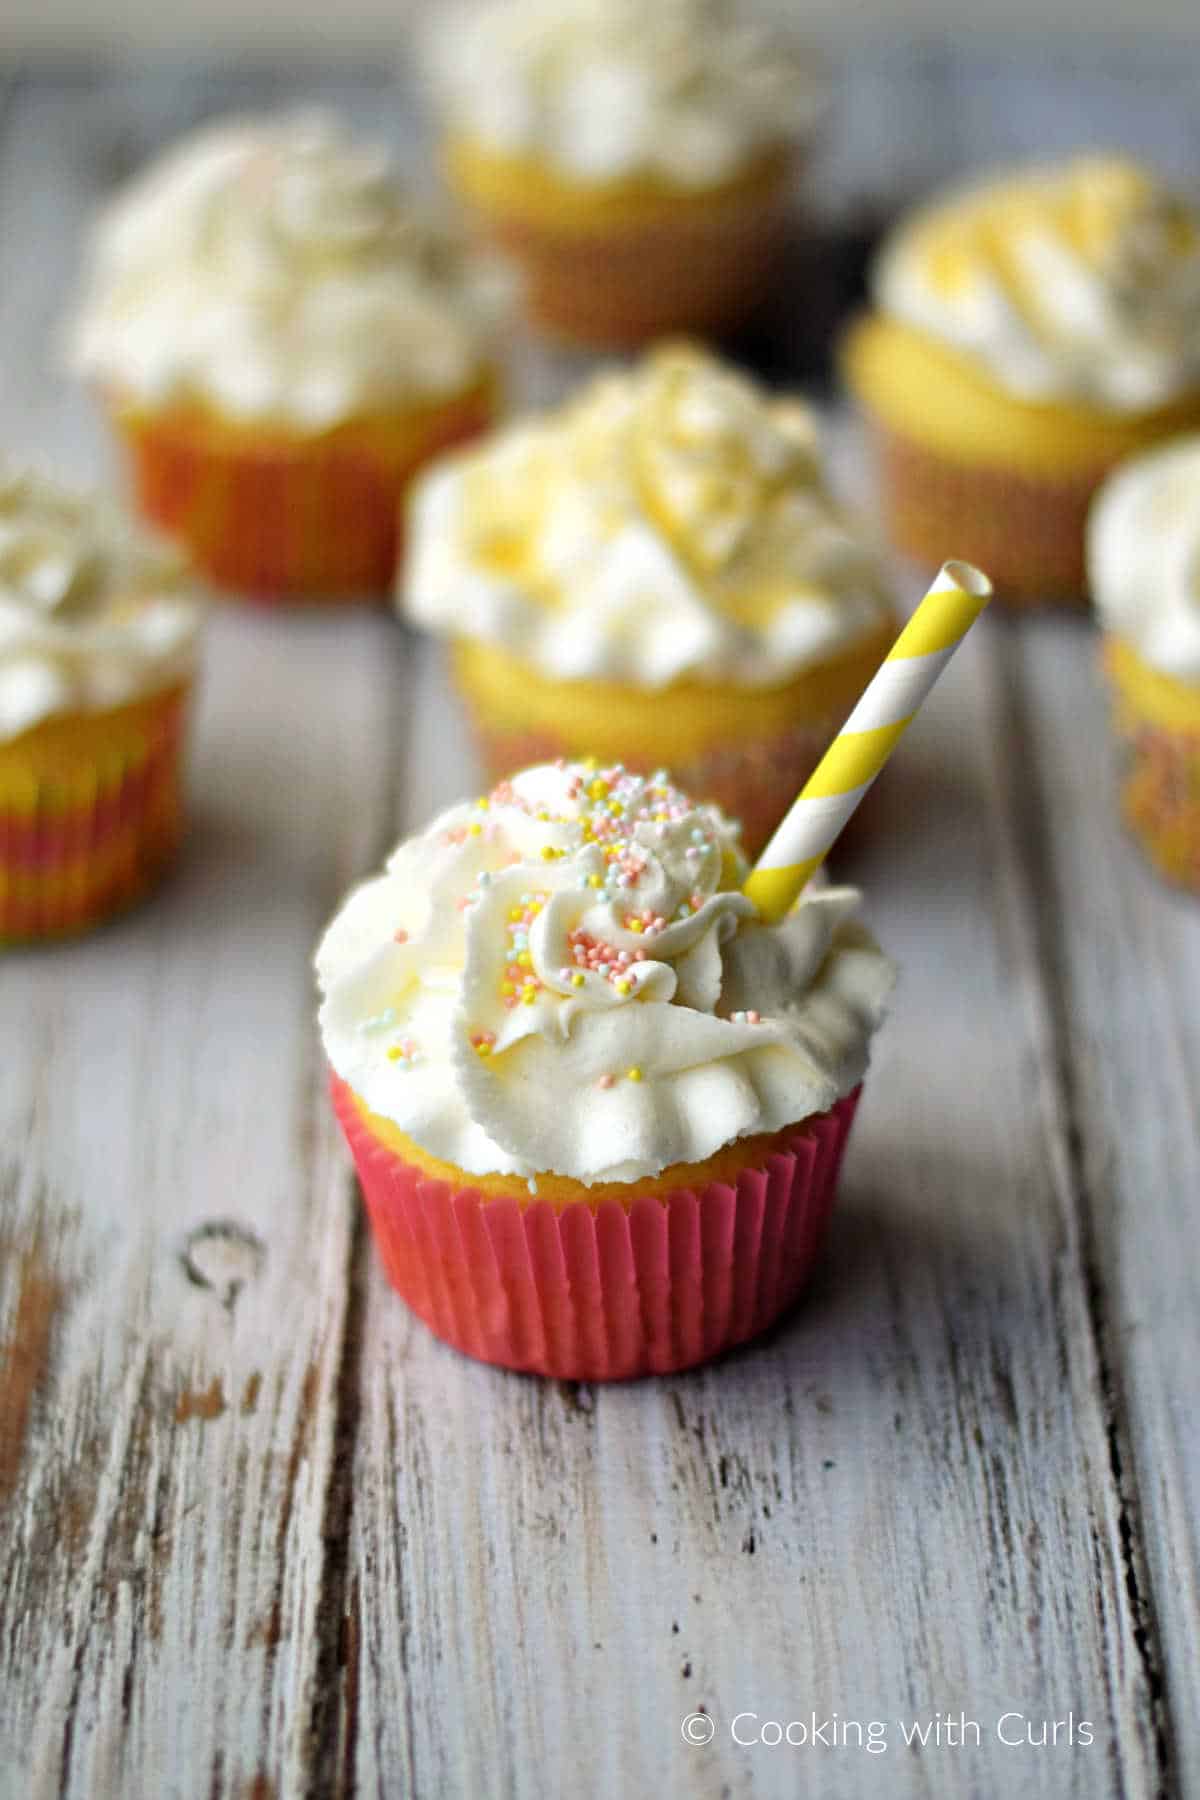 A white frosting topped cupcake with a pink wrapper and yellow striped straw sitting in front of six additional cupcakes on a white background.